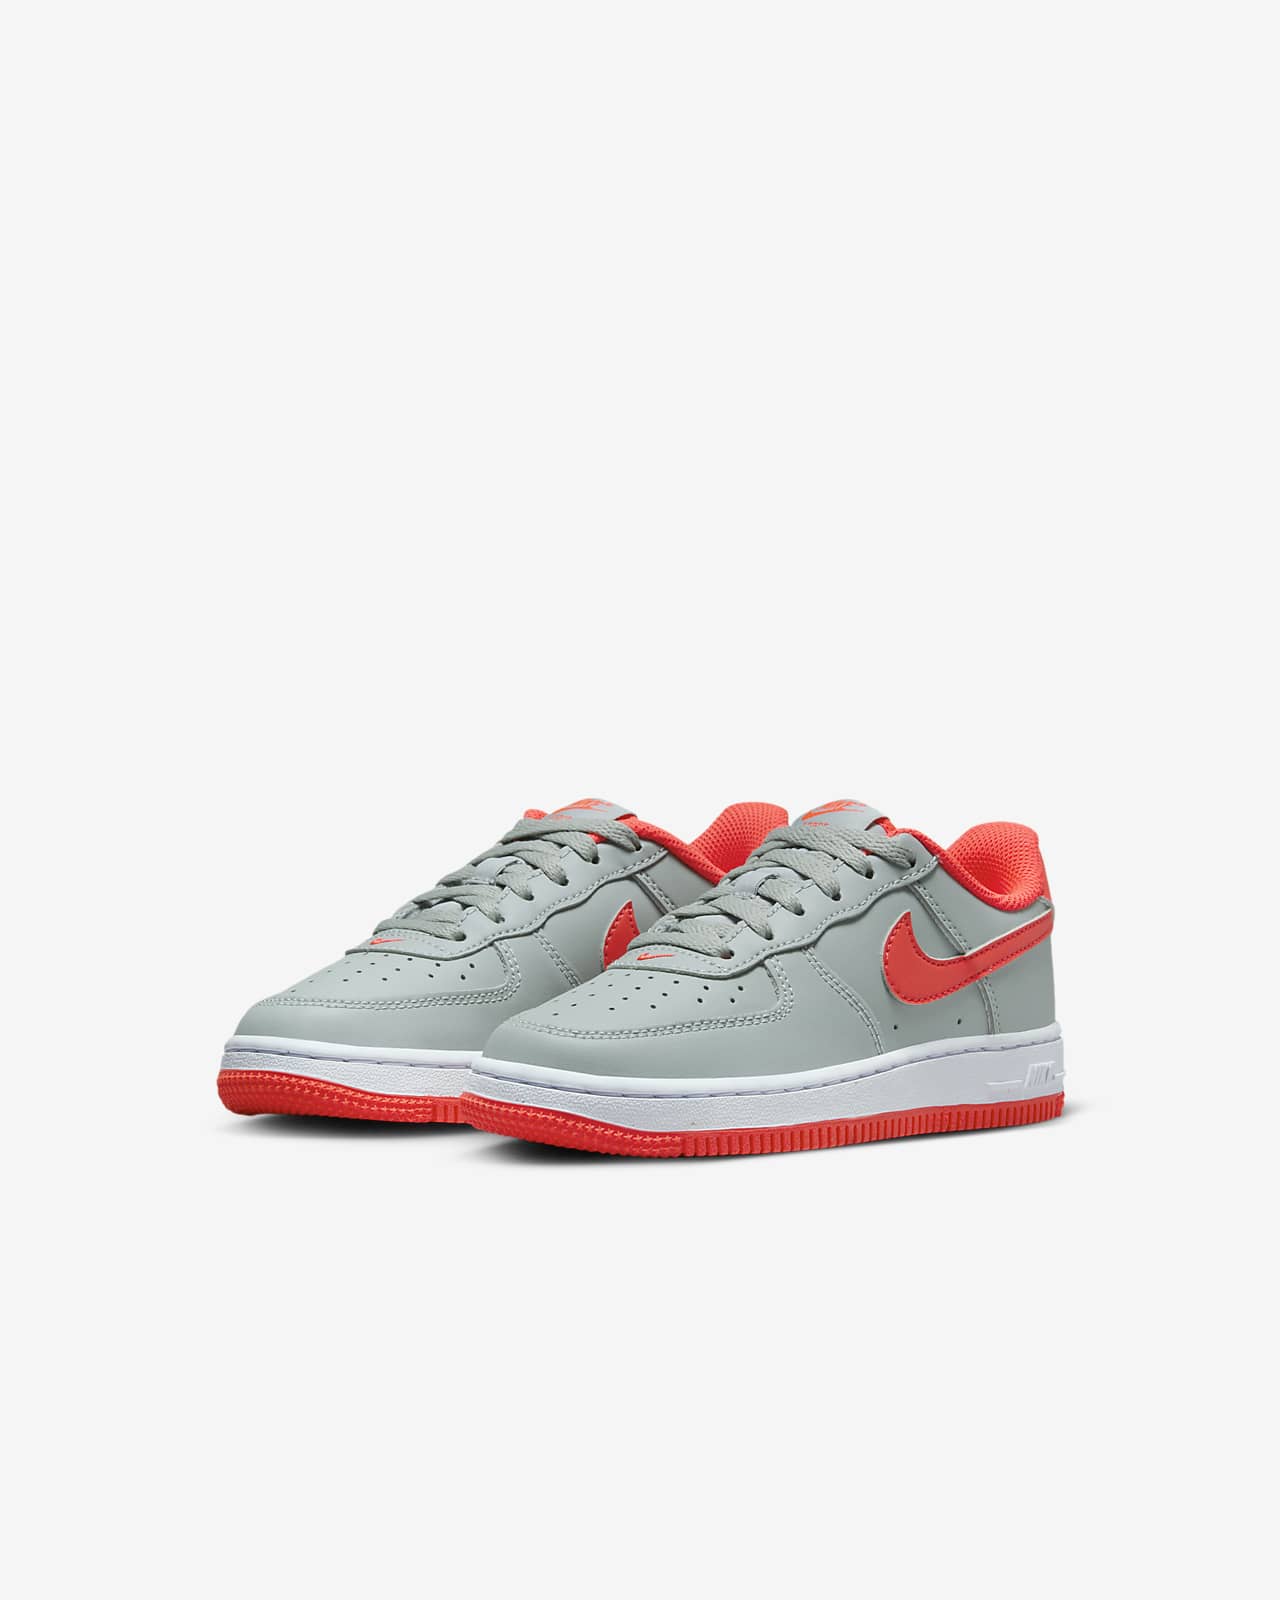 Nike Air Force 1 LV8 3 (PS) Little Kids Basketball Shoes Size 1.5 